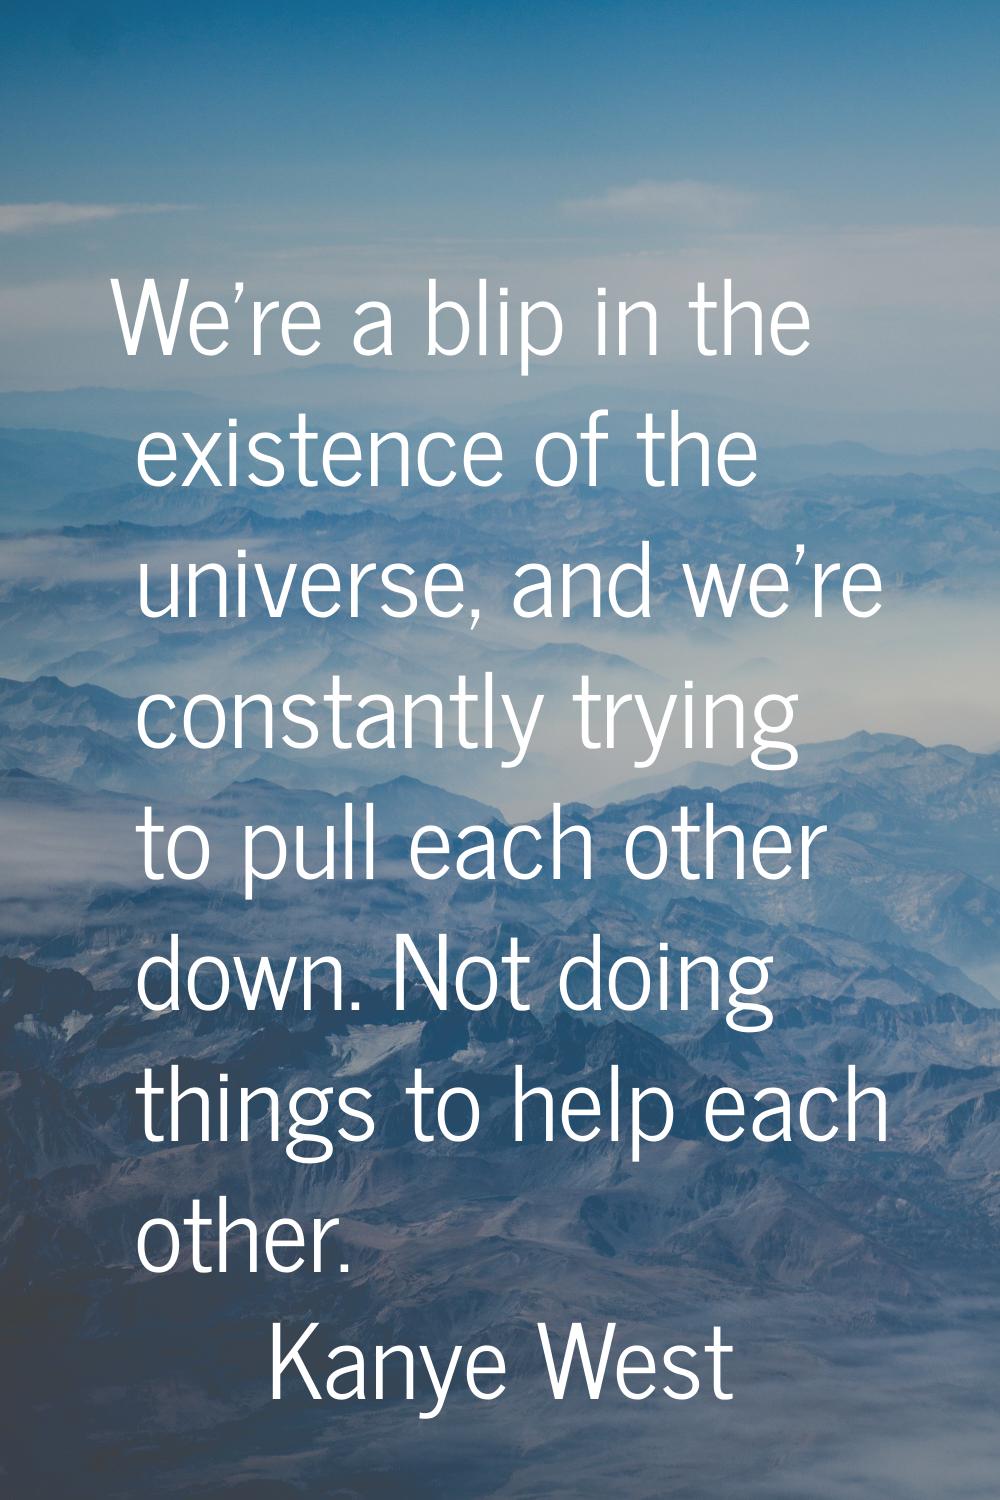 We're a blip in the existence of the universe, and we're constantly trying to pull each other down.